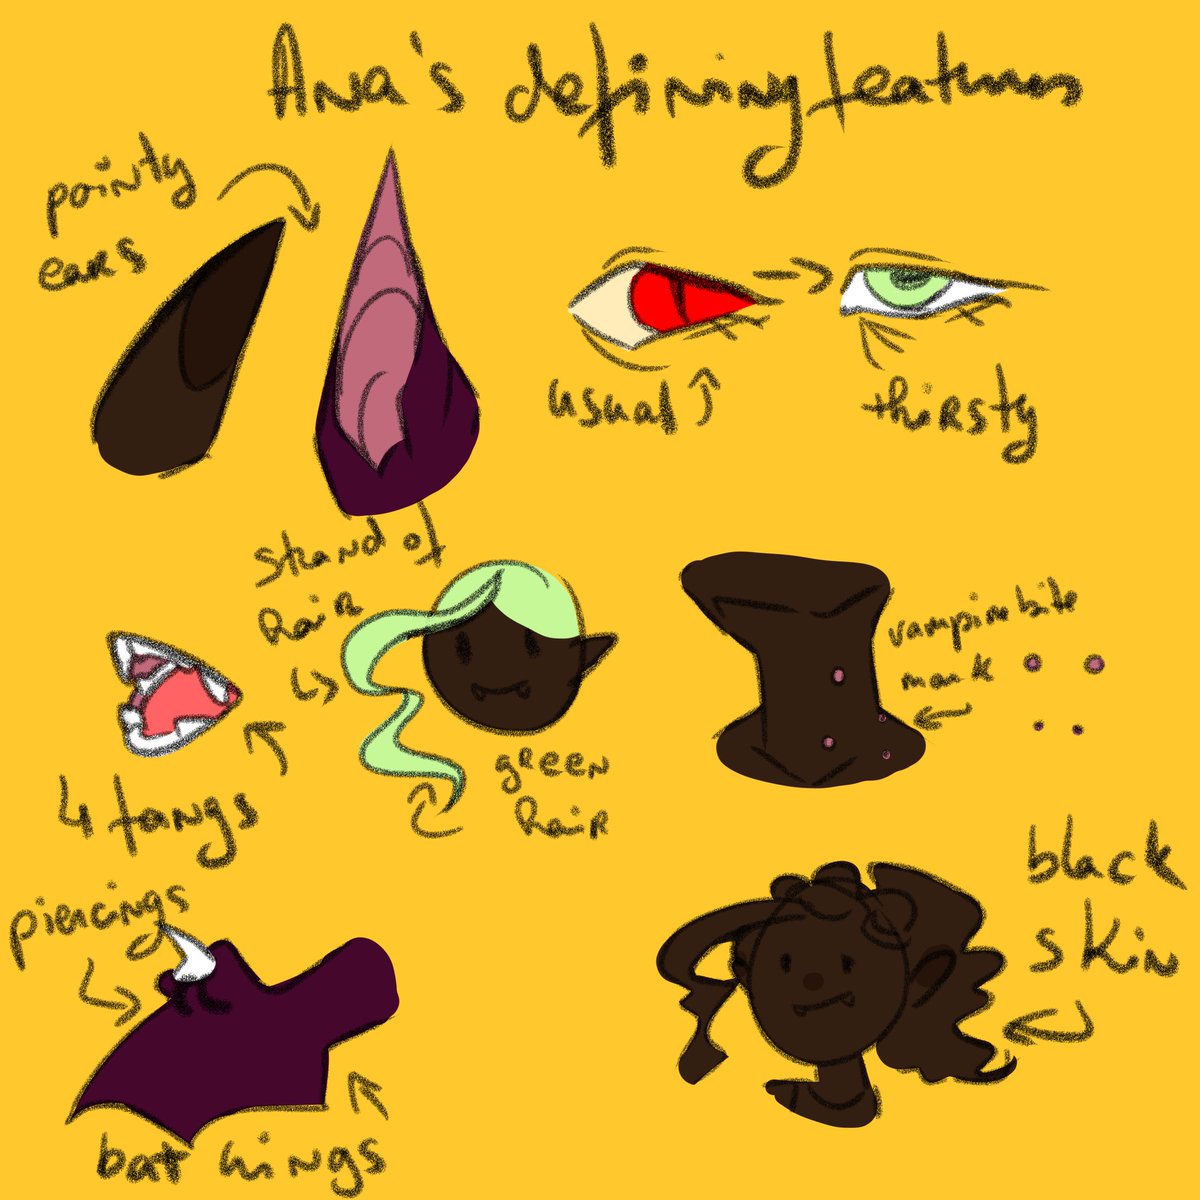 Another important point before I judge the picrews, here's Ana's defining features that make her her